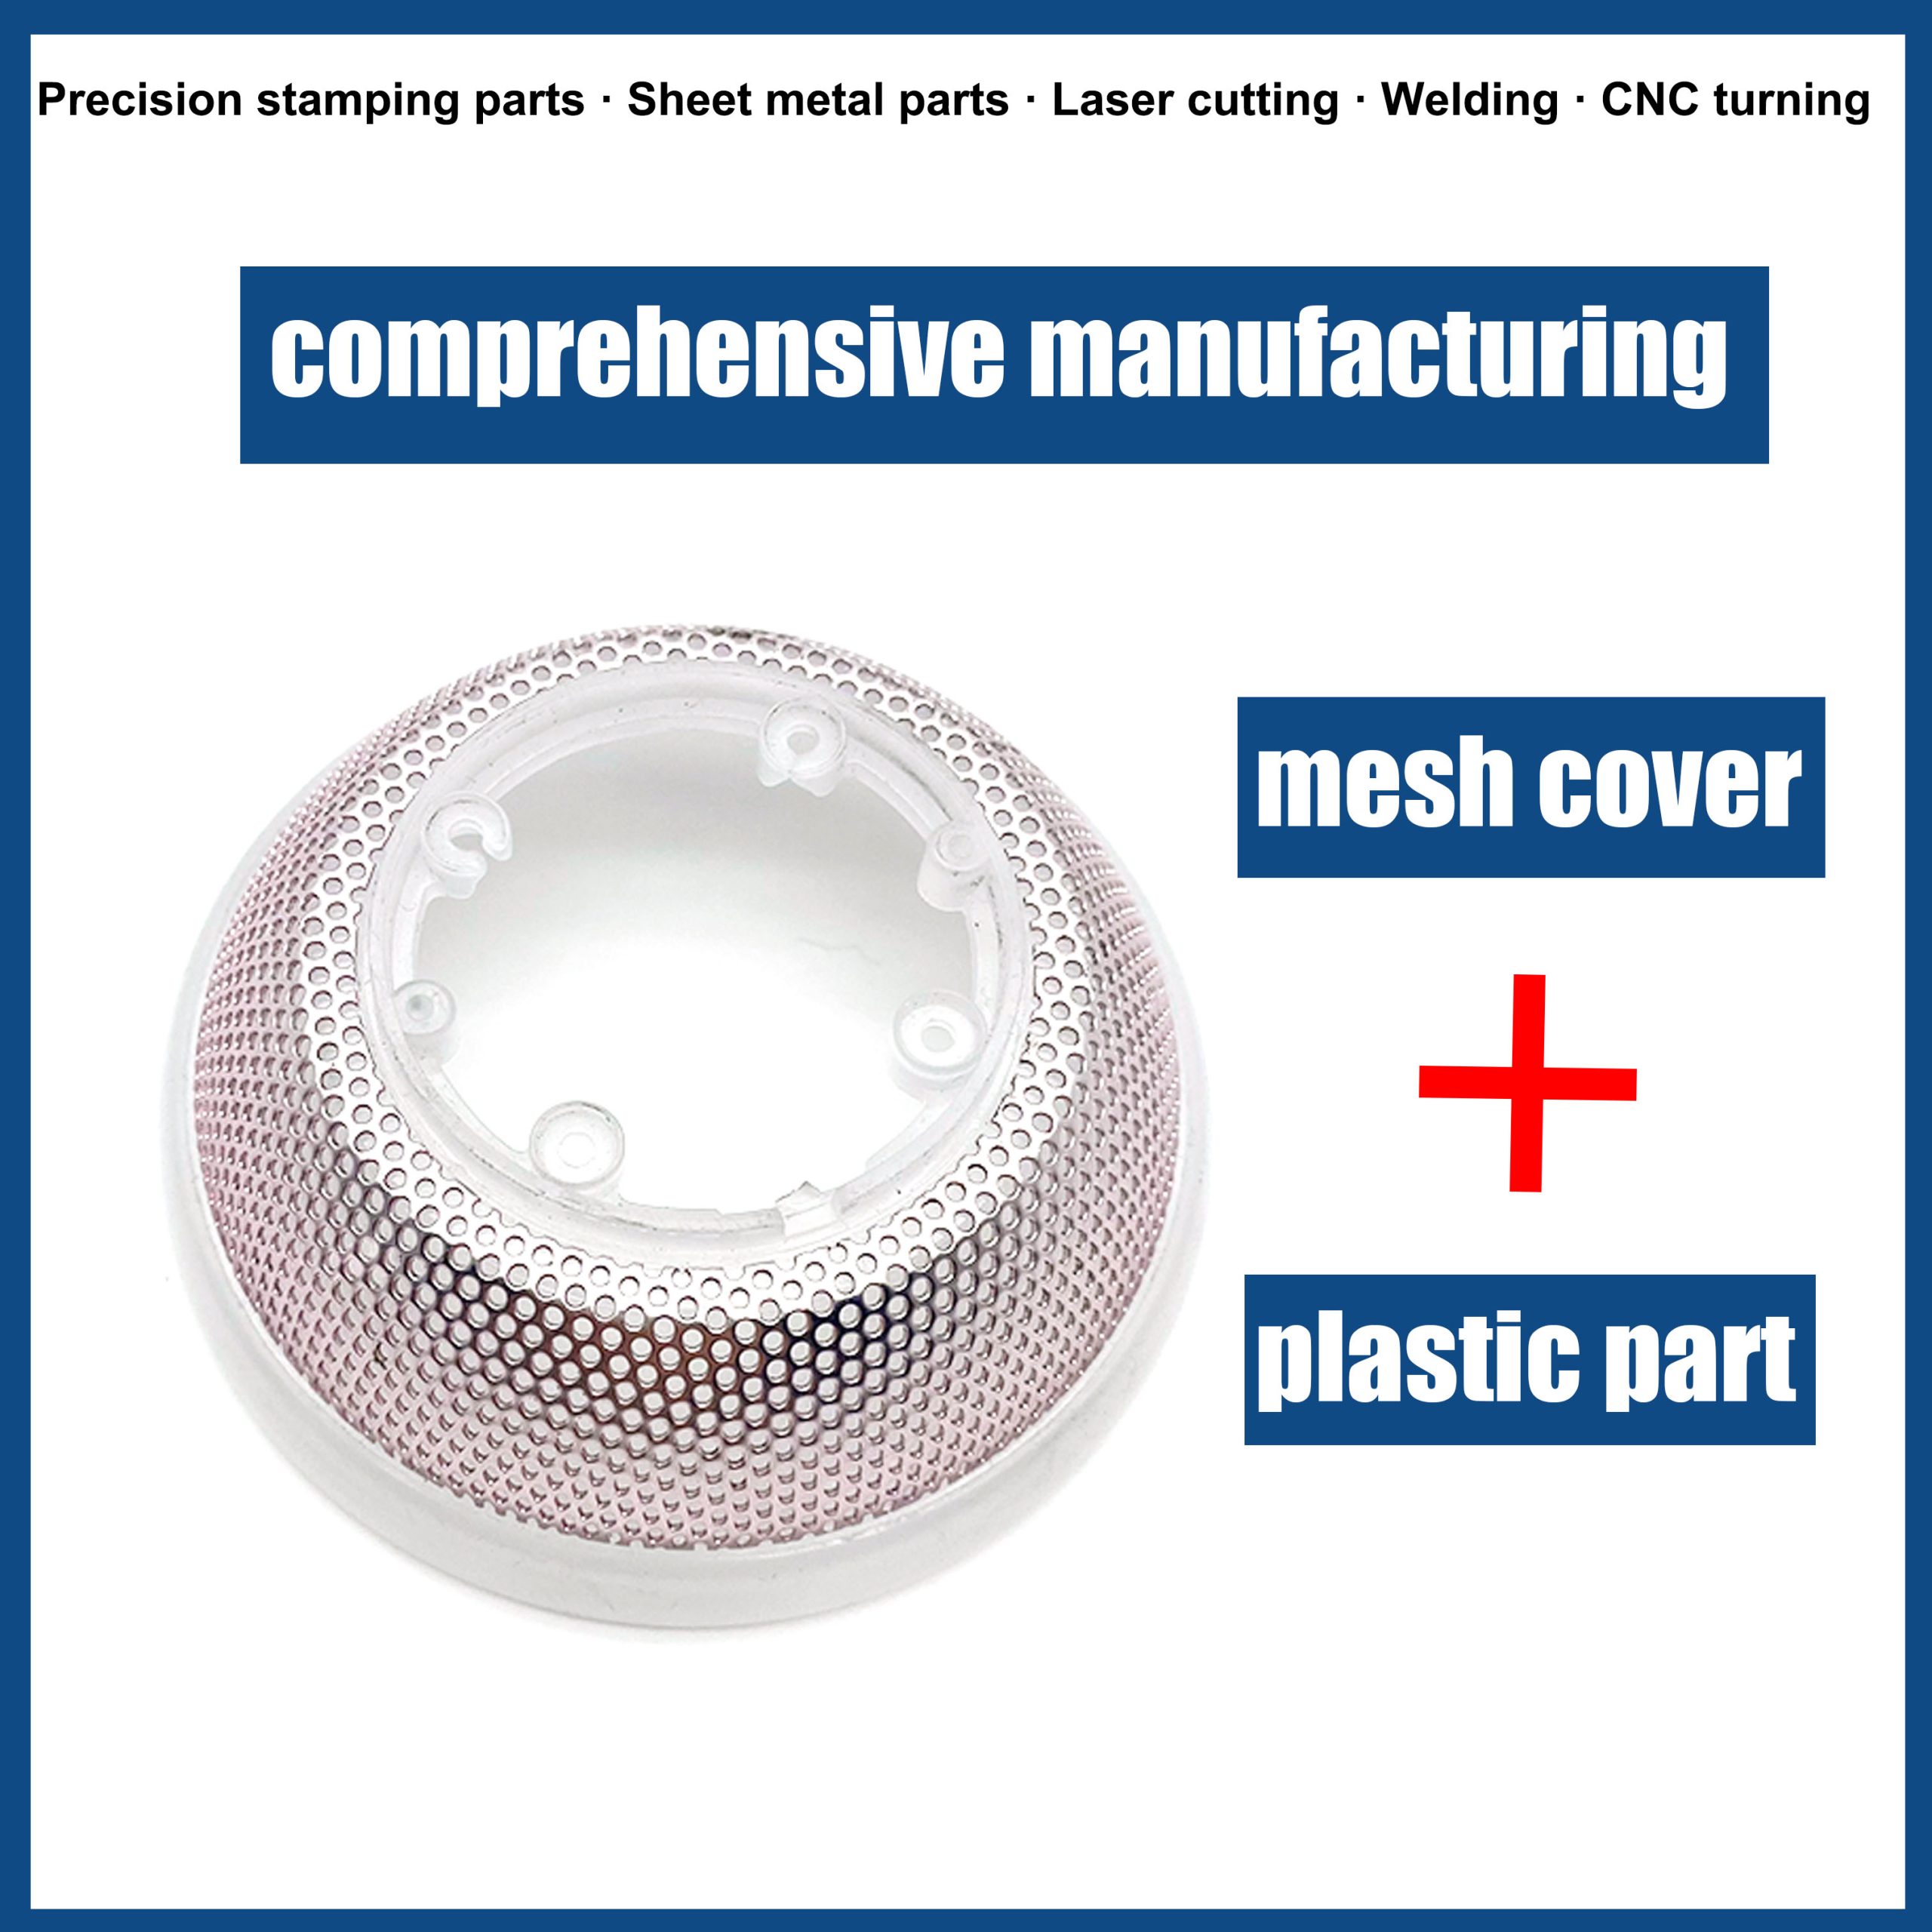 glow stick mesh cover comprehensive manufacturing